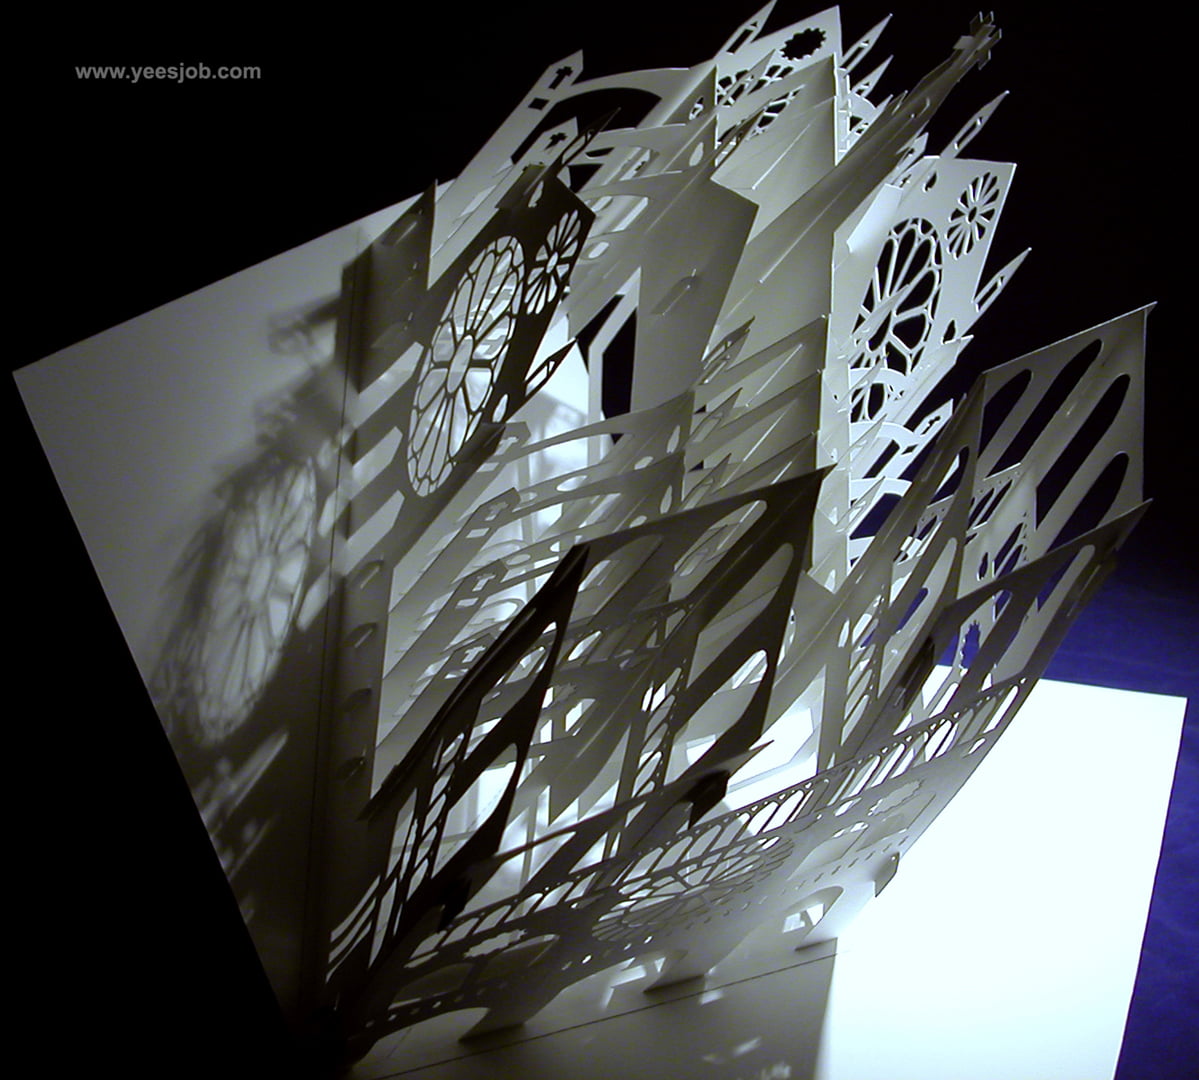 Notre Dame Cathedral -180-Degrees-Open Pop up DIY Kirigami Architecture